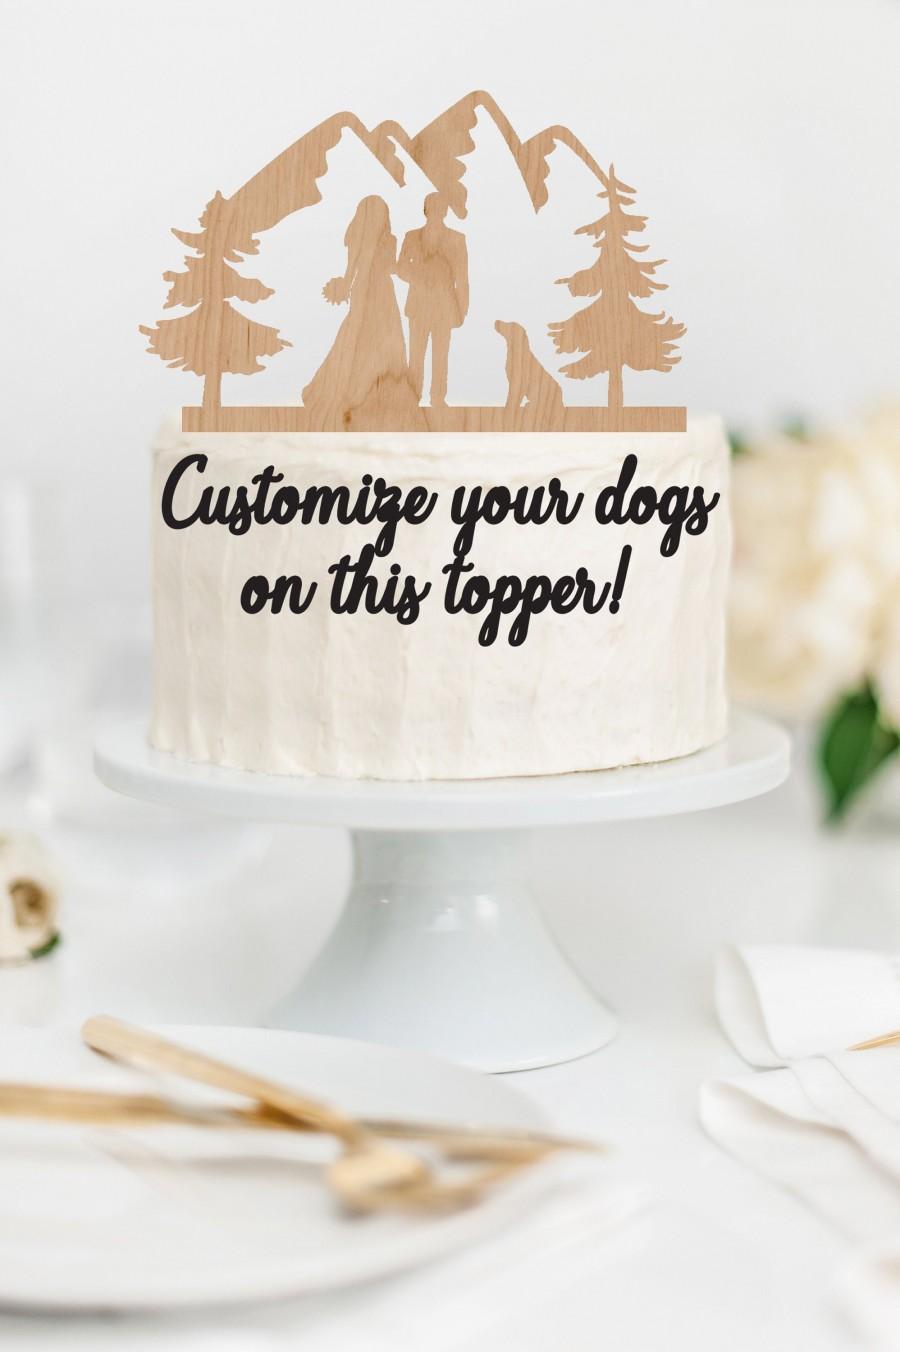 Wedding - BRIDE GROOM Couple with DOG or Dogs Wood Mountain Wedding Cake Topper / Mountain outdoor bride groom cake topper / Wedding cake topper